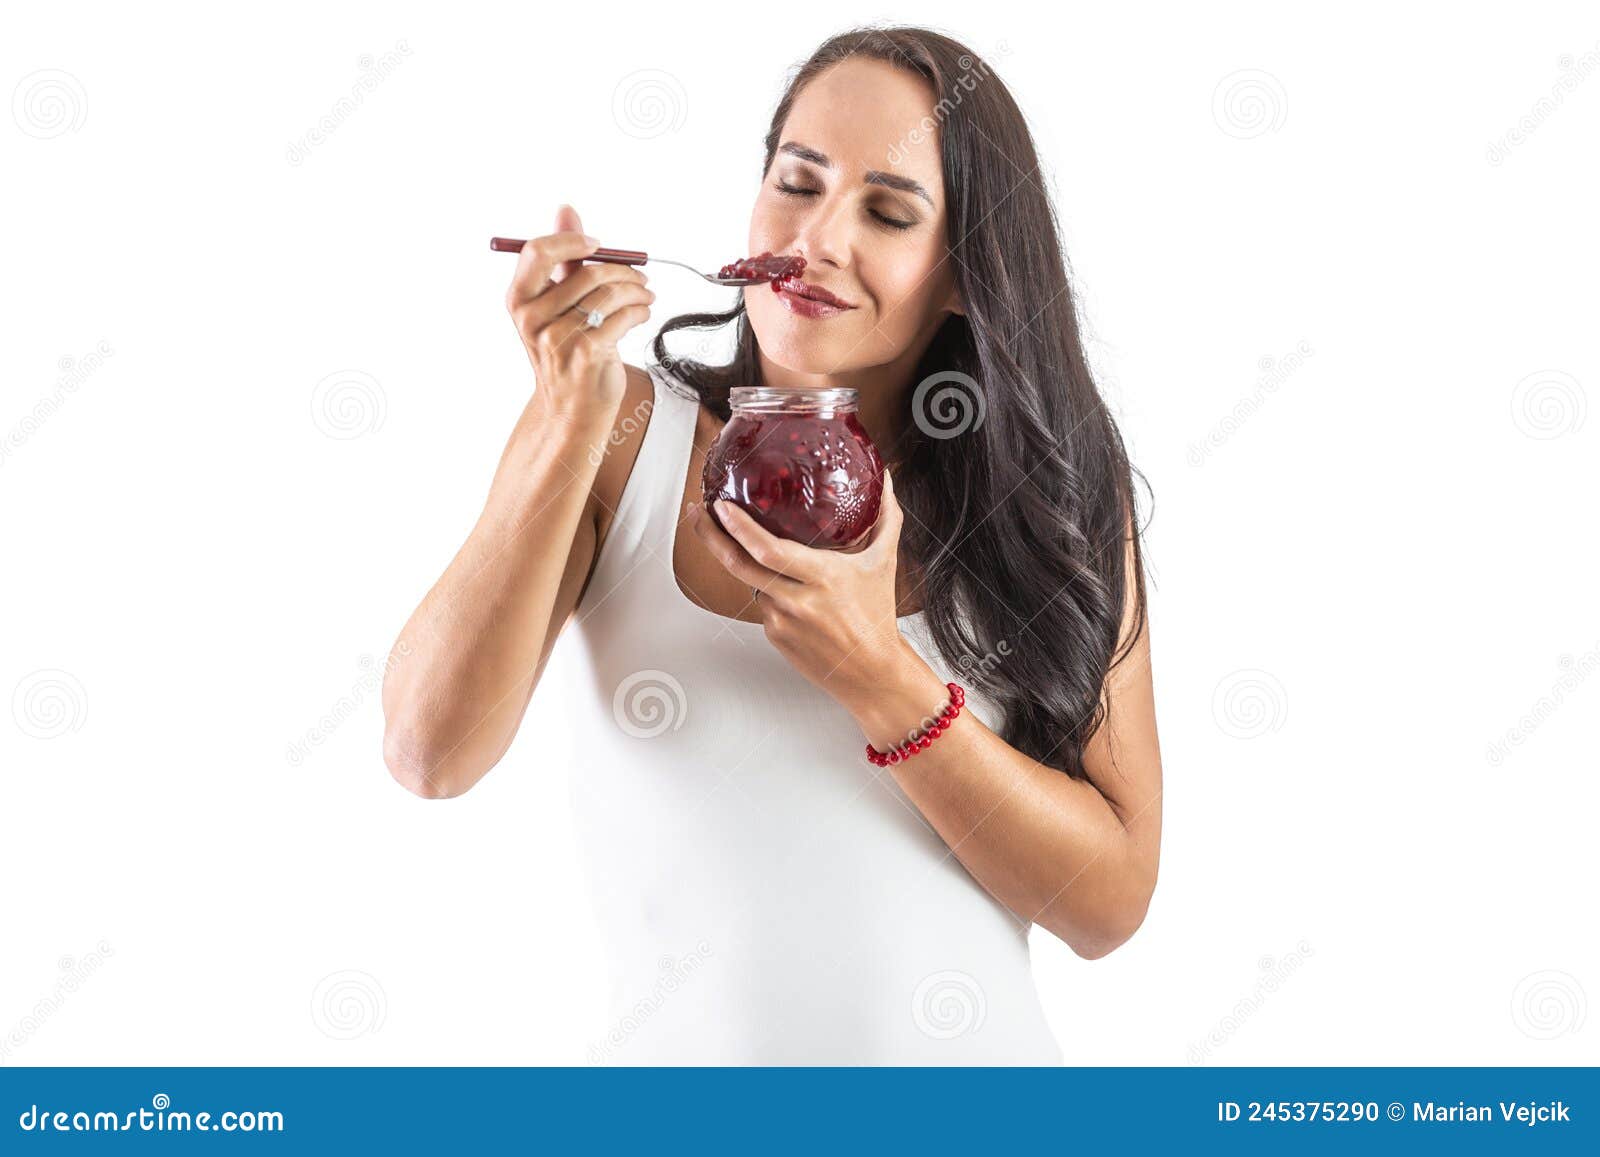 charming brunette is holding a spoon sull of jam and smelling the tasty and sweet aroma.  background